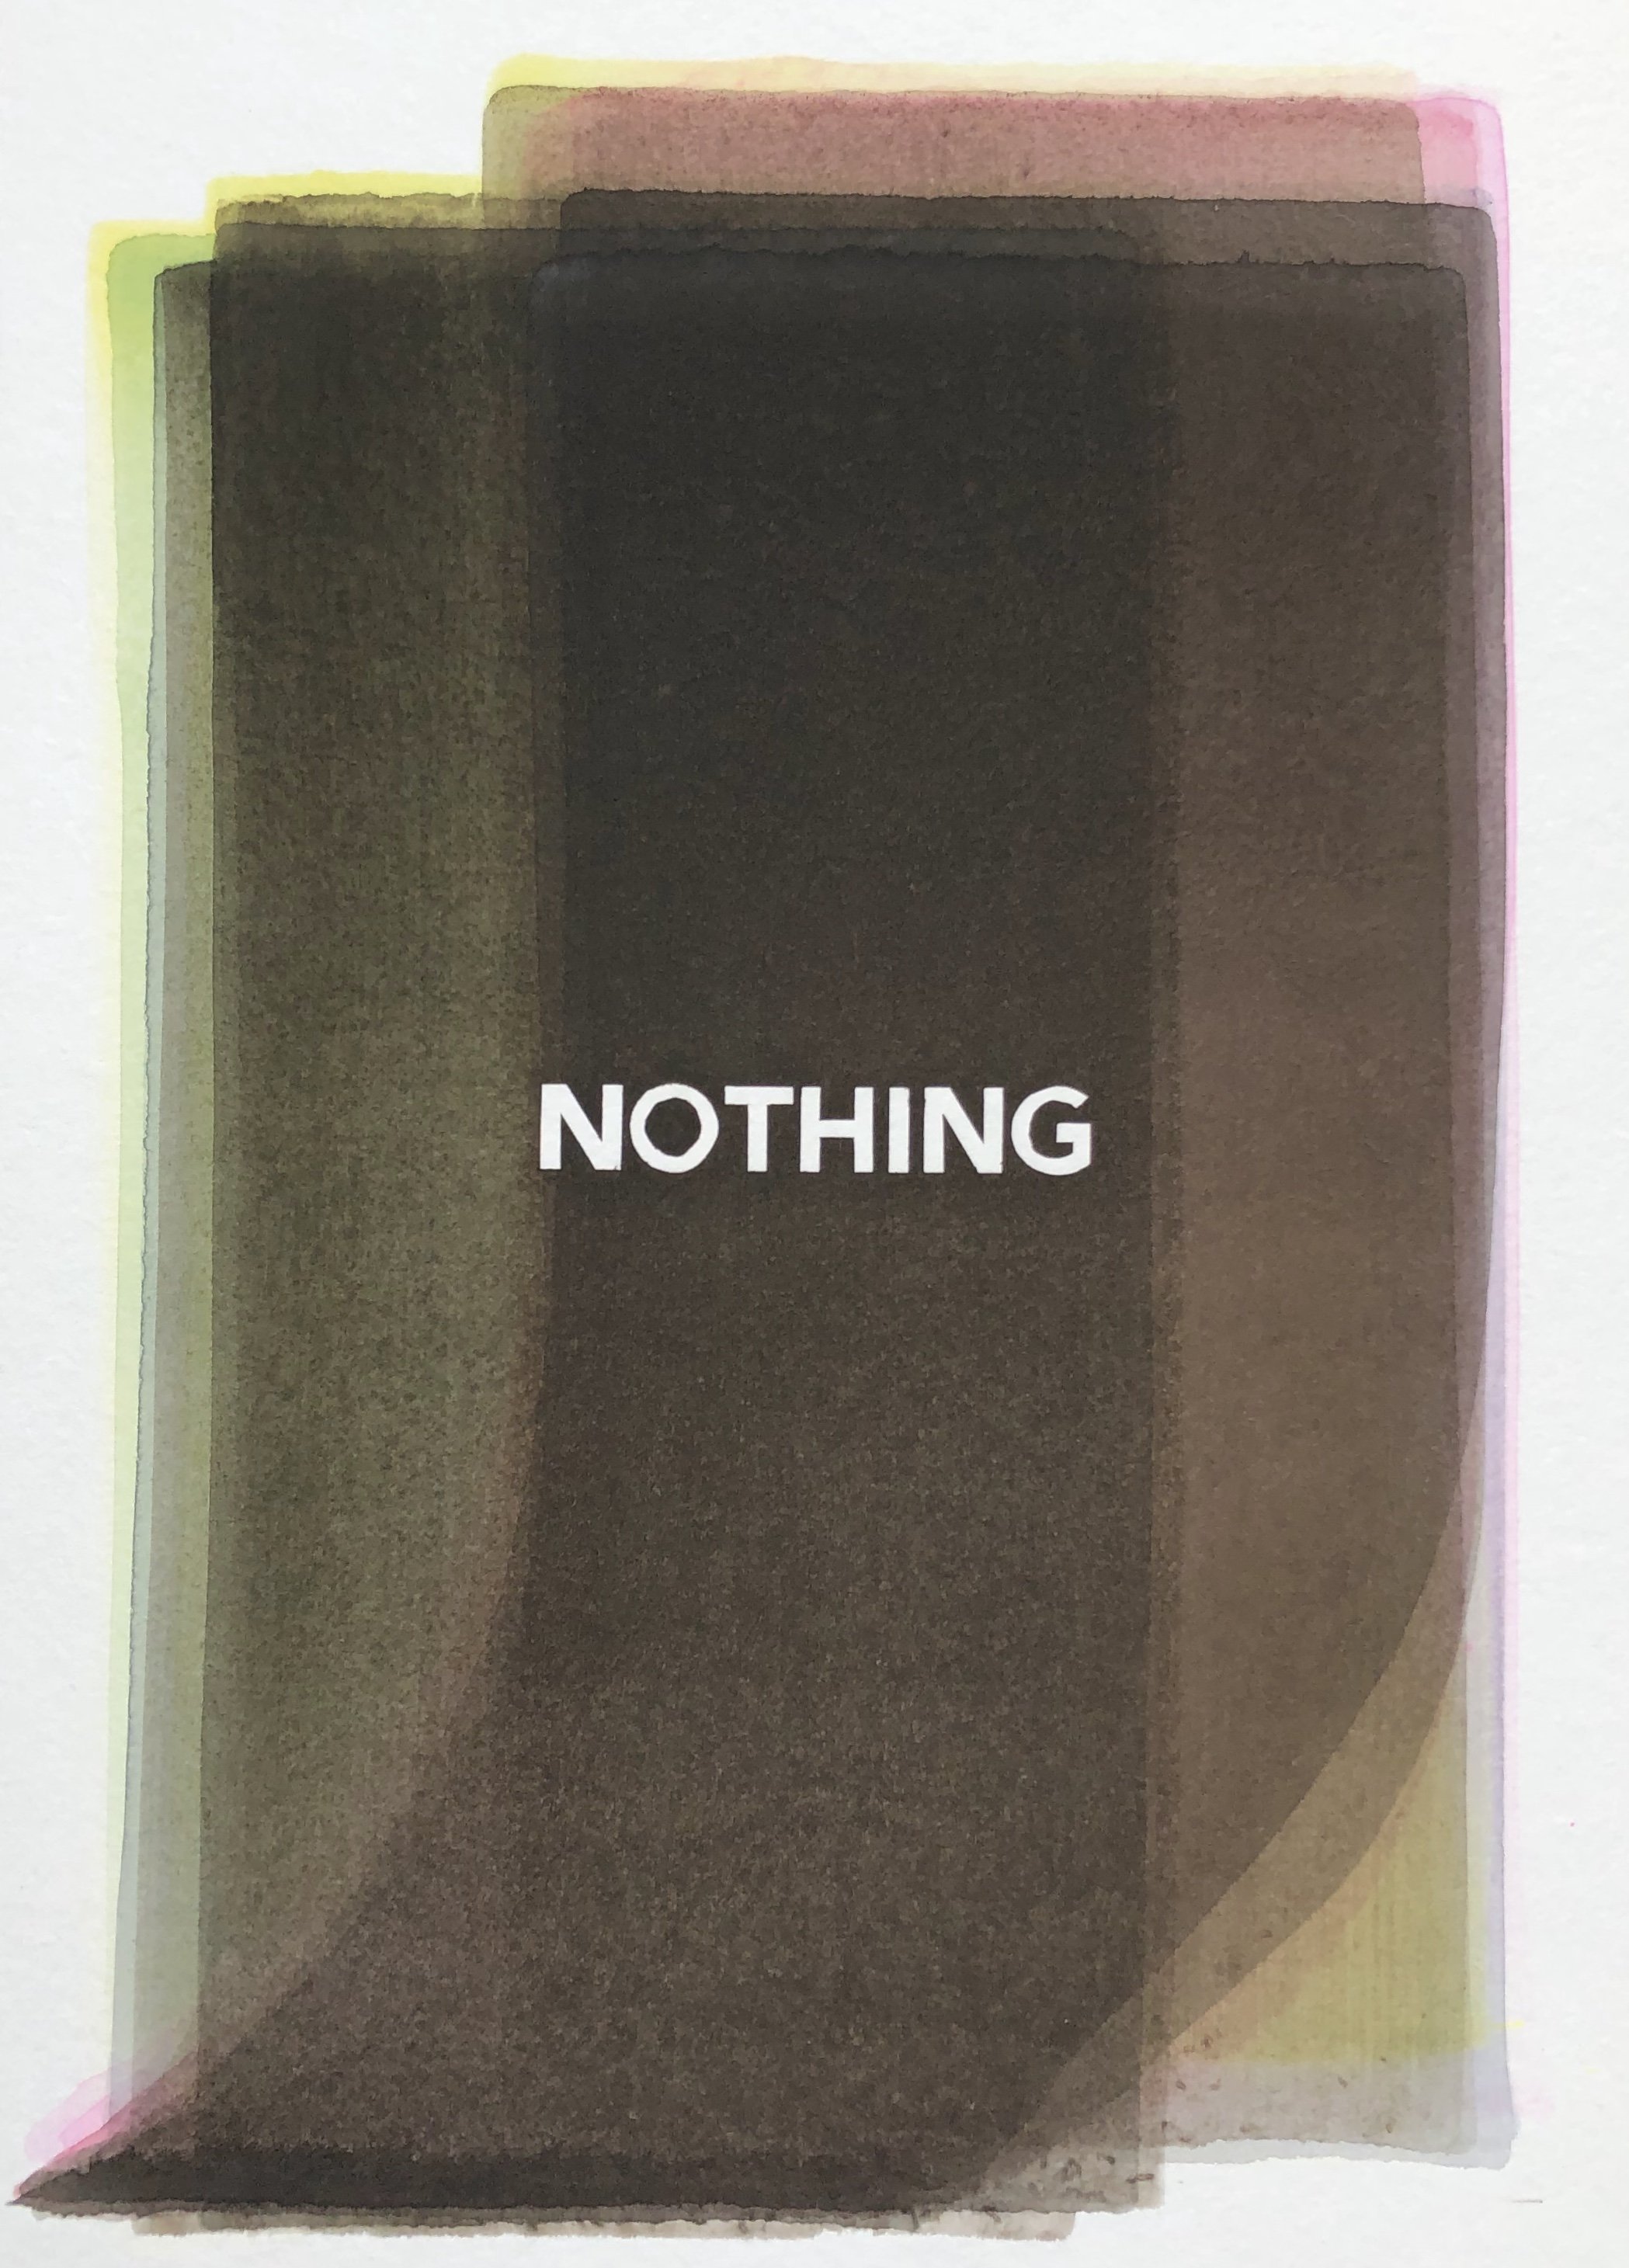   Nothing V . 2020. watercolour on paper. 36x26cm. 